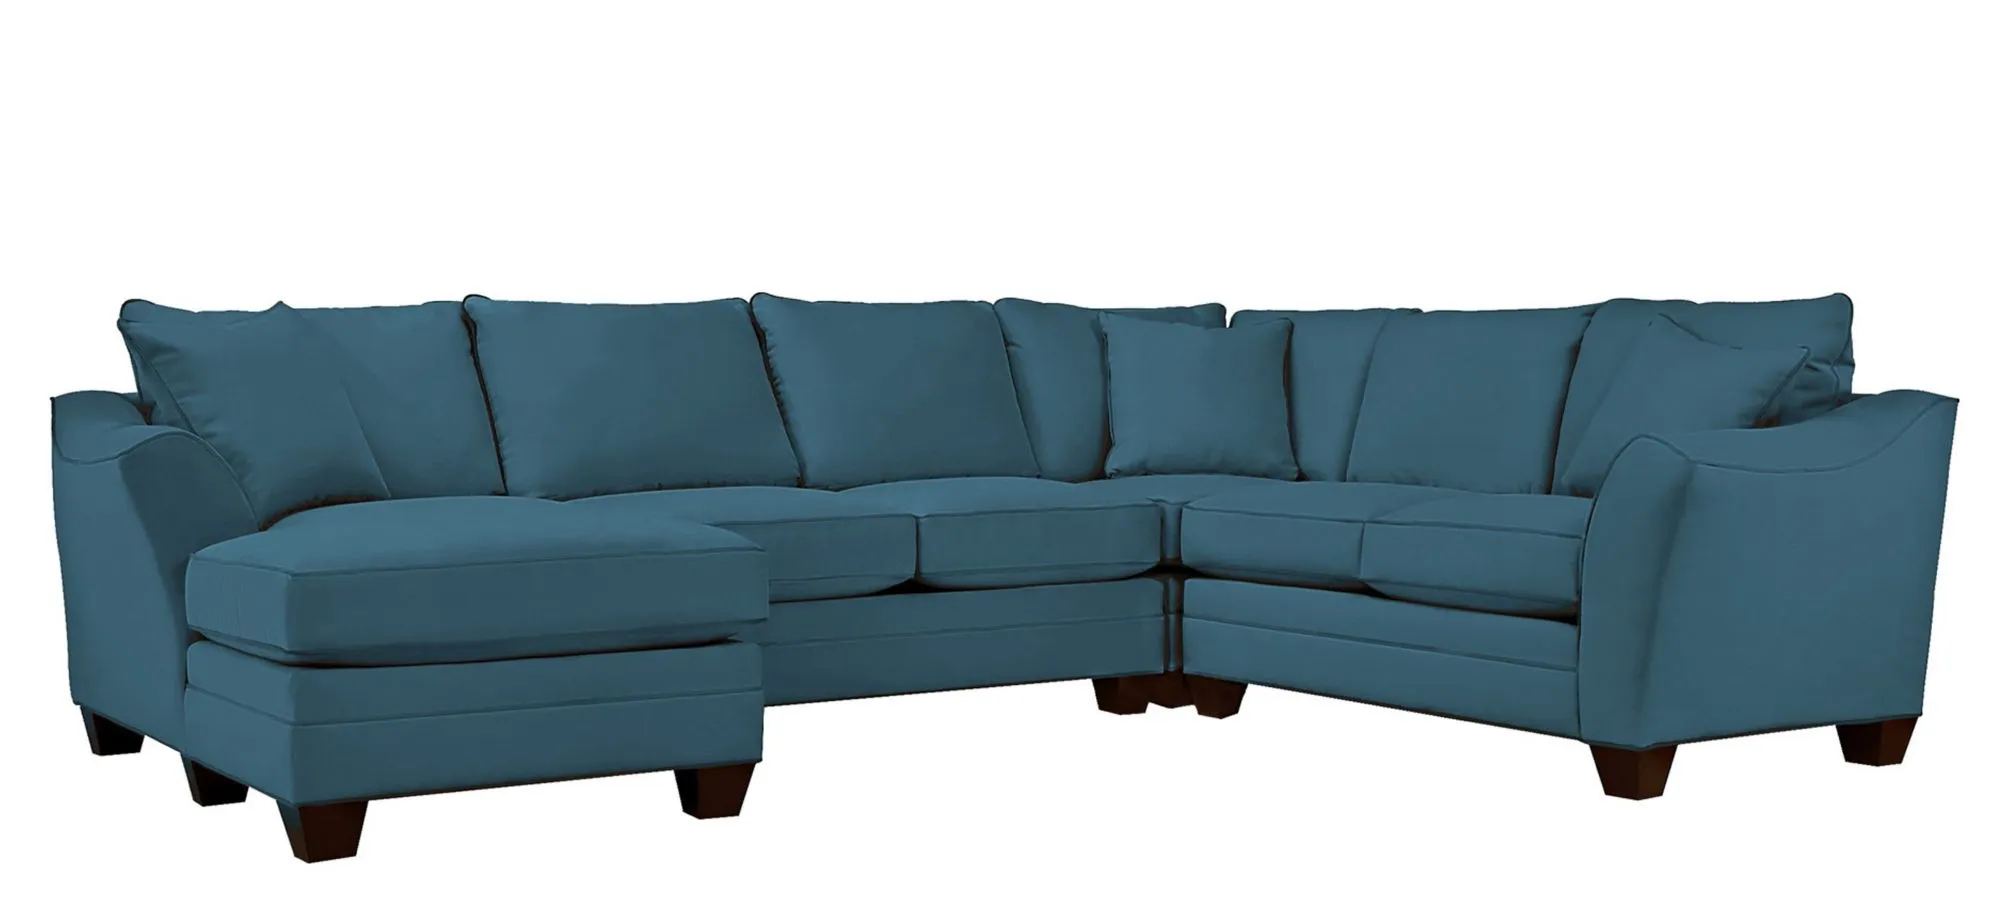 Foresthill 4-pc. Left Hand Chaise Sectional Sofa in Suede So Soft Lagoon by H.M. Richards